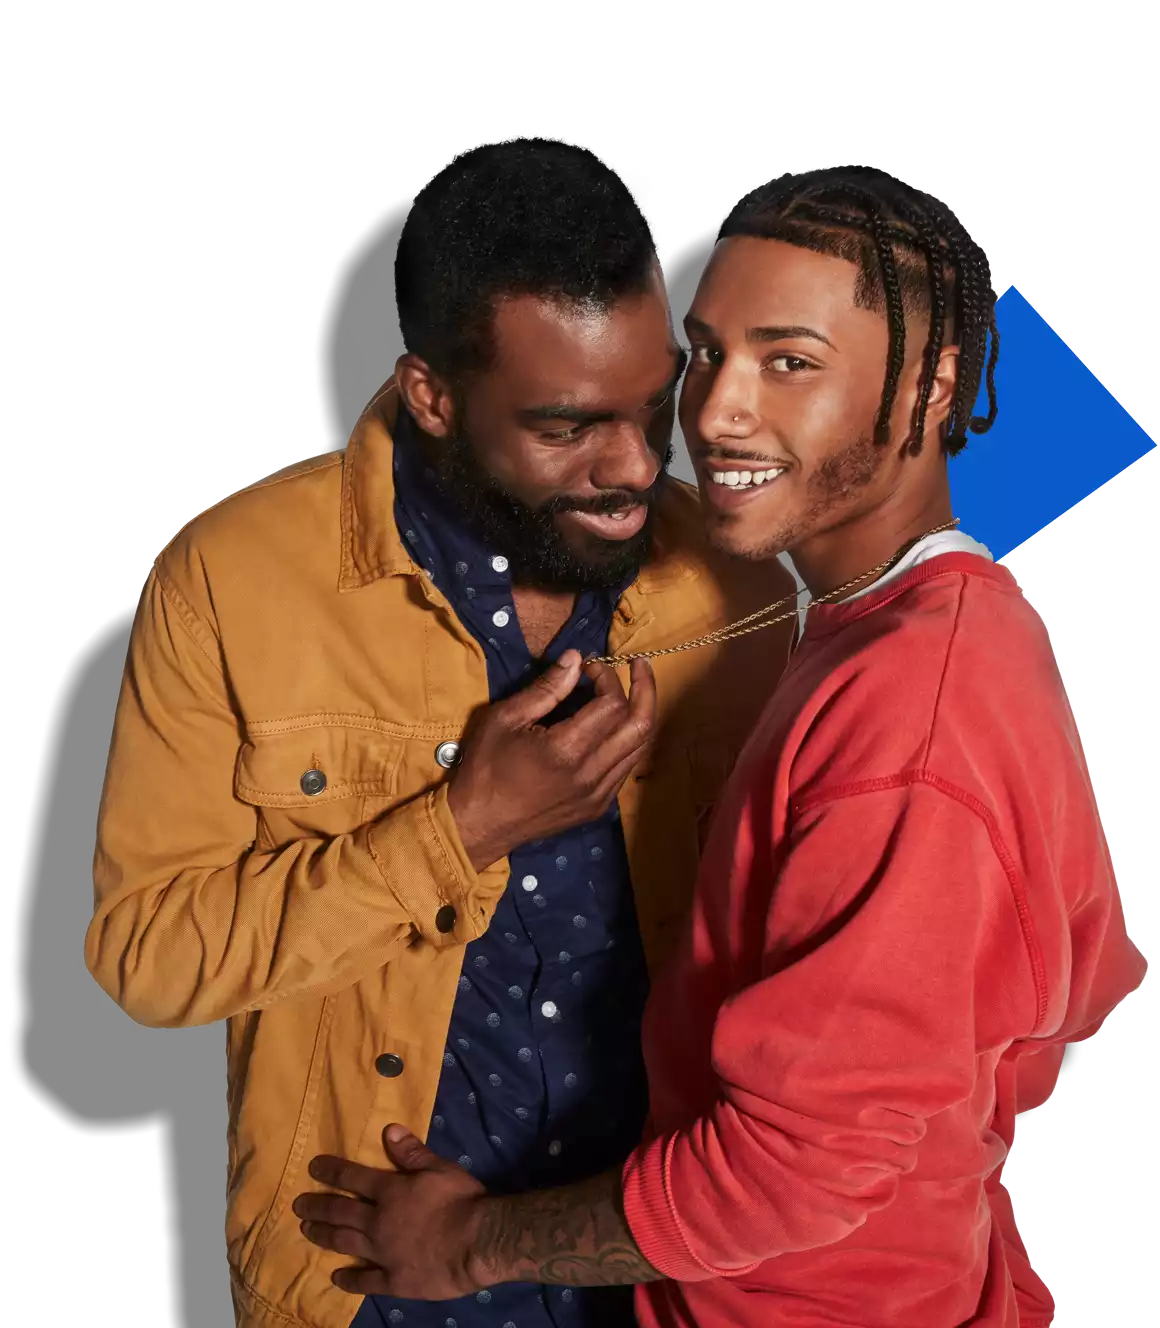 two gay men holding each other intimately and smiling